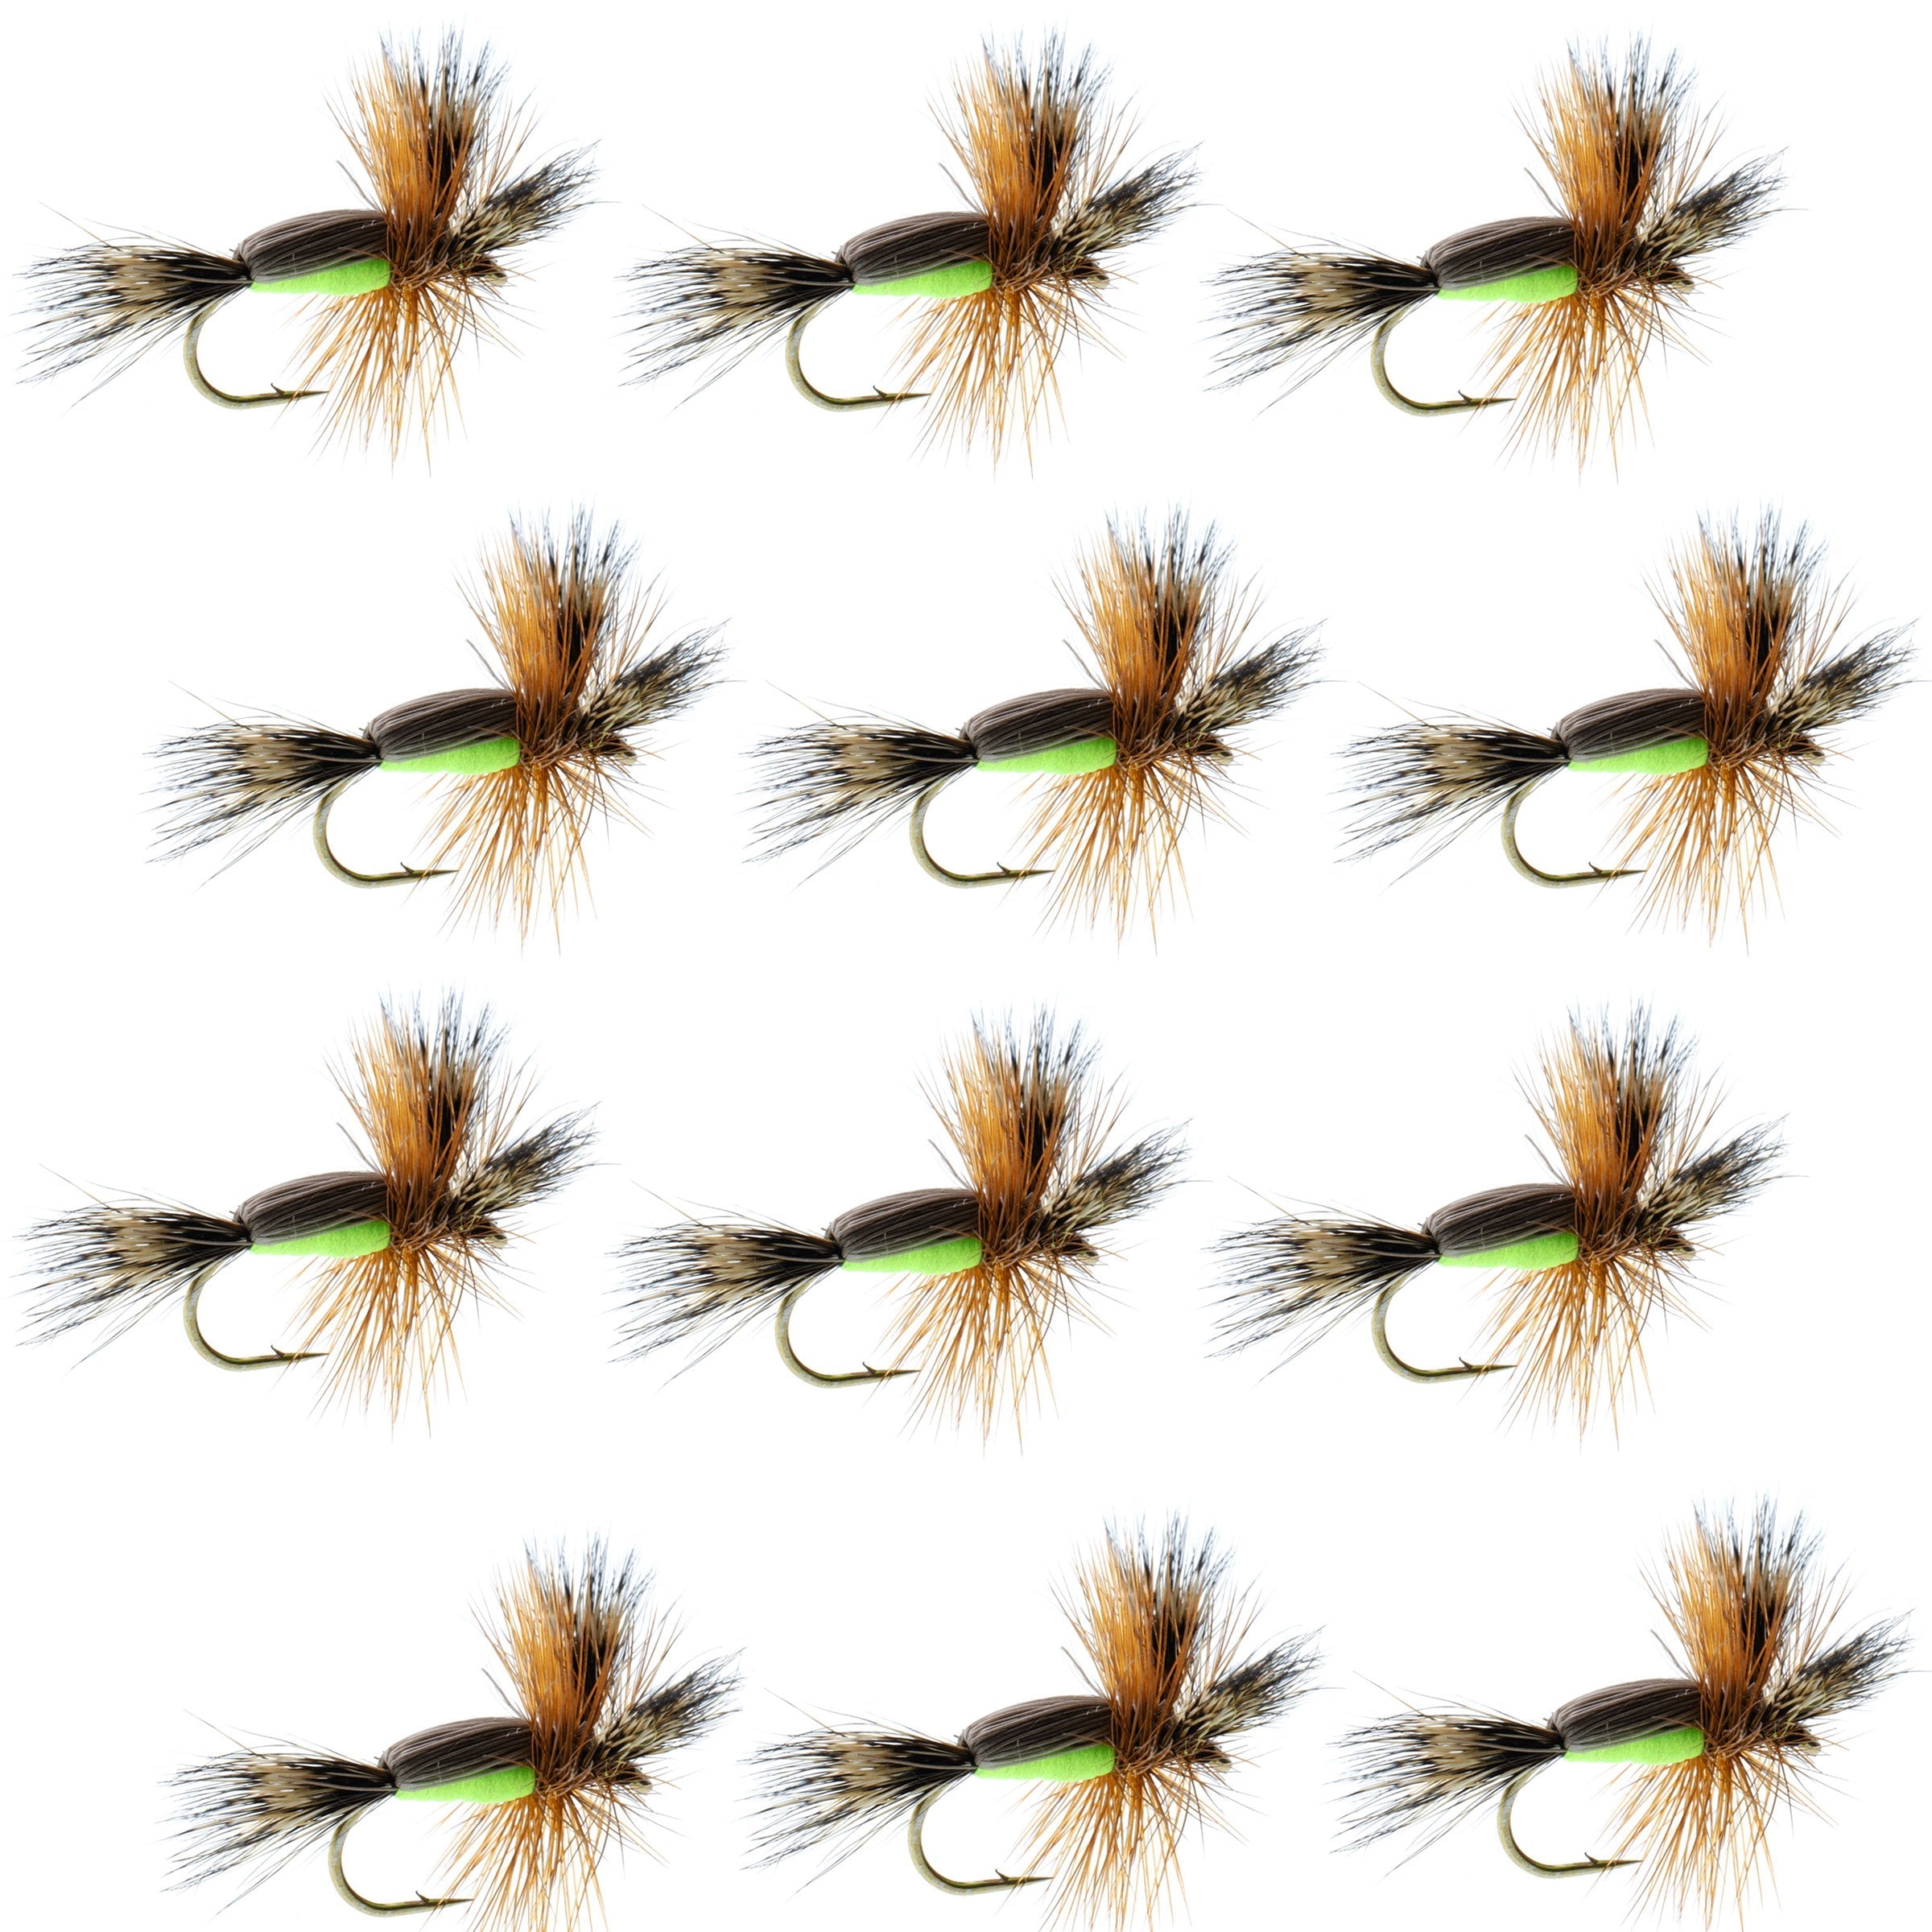 Chartreuse Humpy Classic Hair Wing Dry Fly - 1 Dozen Flies Hook Size 14